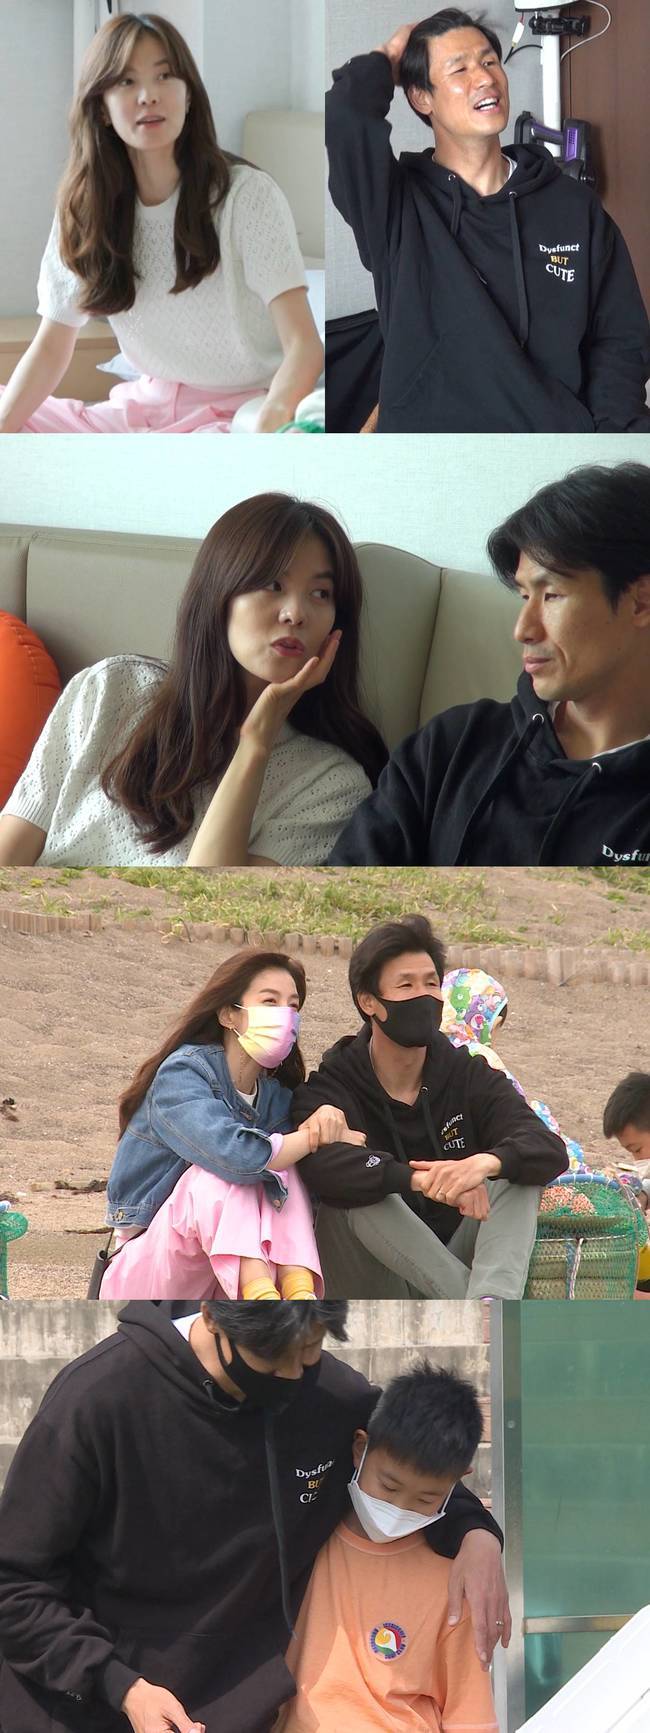 Kim Sung-eun panics over husband Jung Jo-gook HobbyOn SBS Same Bed, Different Dreams 2 Season 2 - You Are My Destiny (hereinafter You Are My Destiny), the first Jeju Island trip of the Kim Sung-eun Jung Jo-gook family is unveiled.On this day, Kim Sung-eun and three siblings will visit the Jeju Island hostel where her husband Jung Jo-gook lives for the first time. Jung Jo-gooks hostel, which is neatly arranged in a cool size and ocean view, will be released.Kim Sung-eun, who was looking at the hostel, found a rotten this left in an empty freezer and a refrigerating room, and was saddened by her husband who lived alone, saying, I am salty.Kim Sung-eun then found her husbands secret Hobby and was once again embarrassed.Kim Sung-eun revealed that he was a Hobby he didnt even know when he was in love, leaving the studio in a fuss.The covert Hobby, which Jung Jo-gook has been hiding for 13 years, is set to be released on air.Meanwhile, Kim Sung-eun suggested to Jung Jo-gook that he would like to live with Jeju Island.Kim Tae-ha, who belongs to the Seoul Youth Soccer Team, decided to leave his family to his family and announced a specific plan to bring Yunha and Jaeha down.Even Kim Tae-ha actively supported the summation, saying that she wanted her mother and father to live together.However, Jung Jo-gook responded consistently and unexpectedly to Kim Tae-has support.In the end, Kim Sung-eun showed a sadness, and a cold energy was circulating between the two.Indeed, it raises questions about what would have happened to the ending of the summation dream that came to the geese couple in their 13th year.